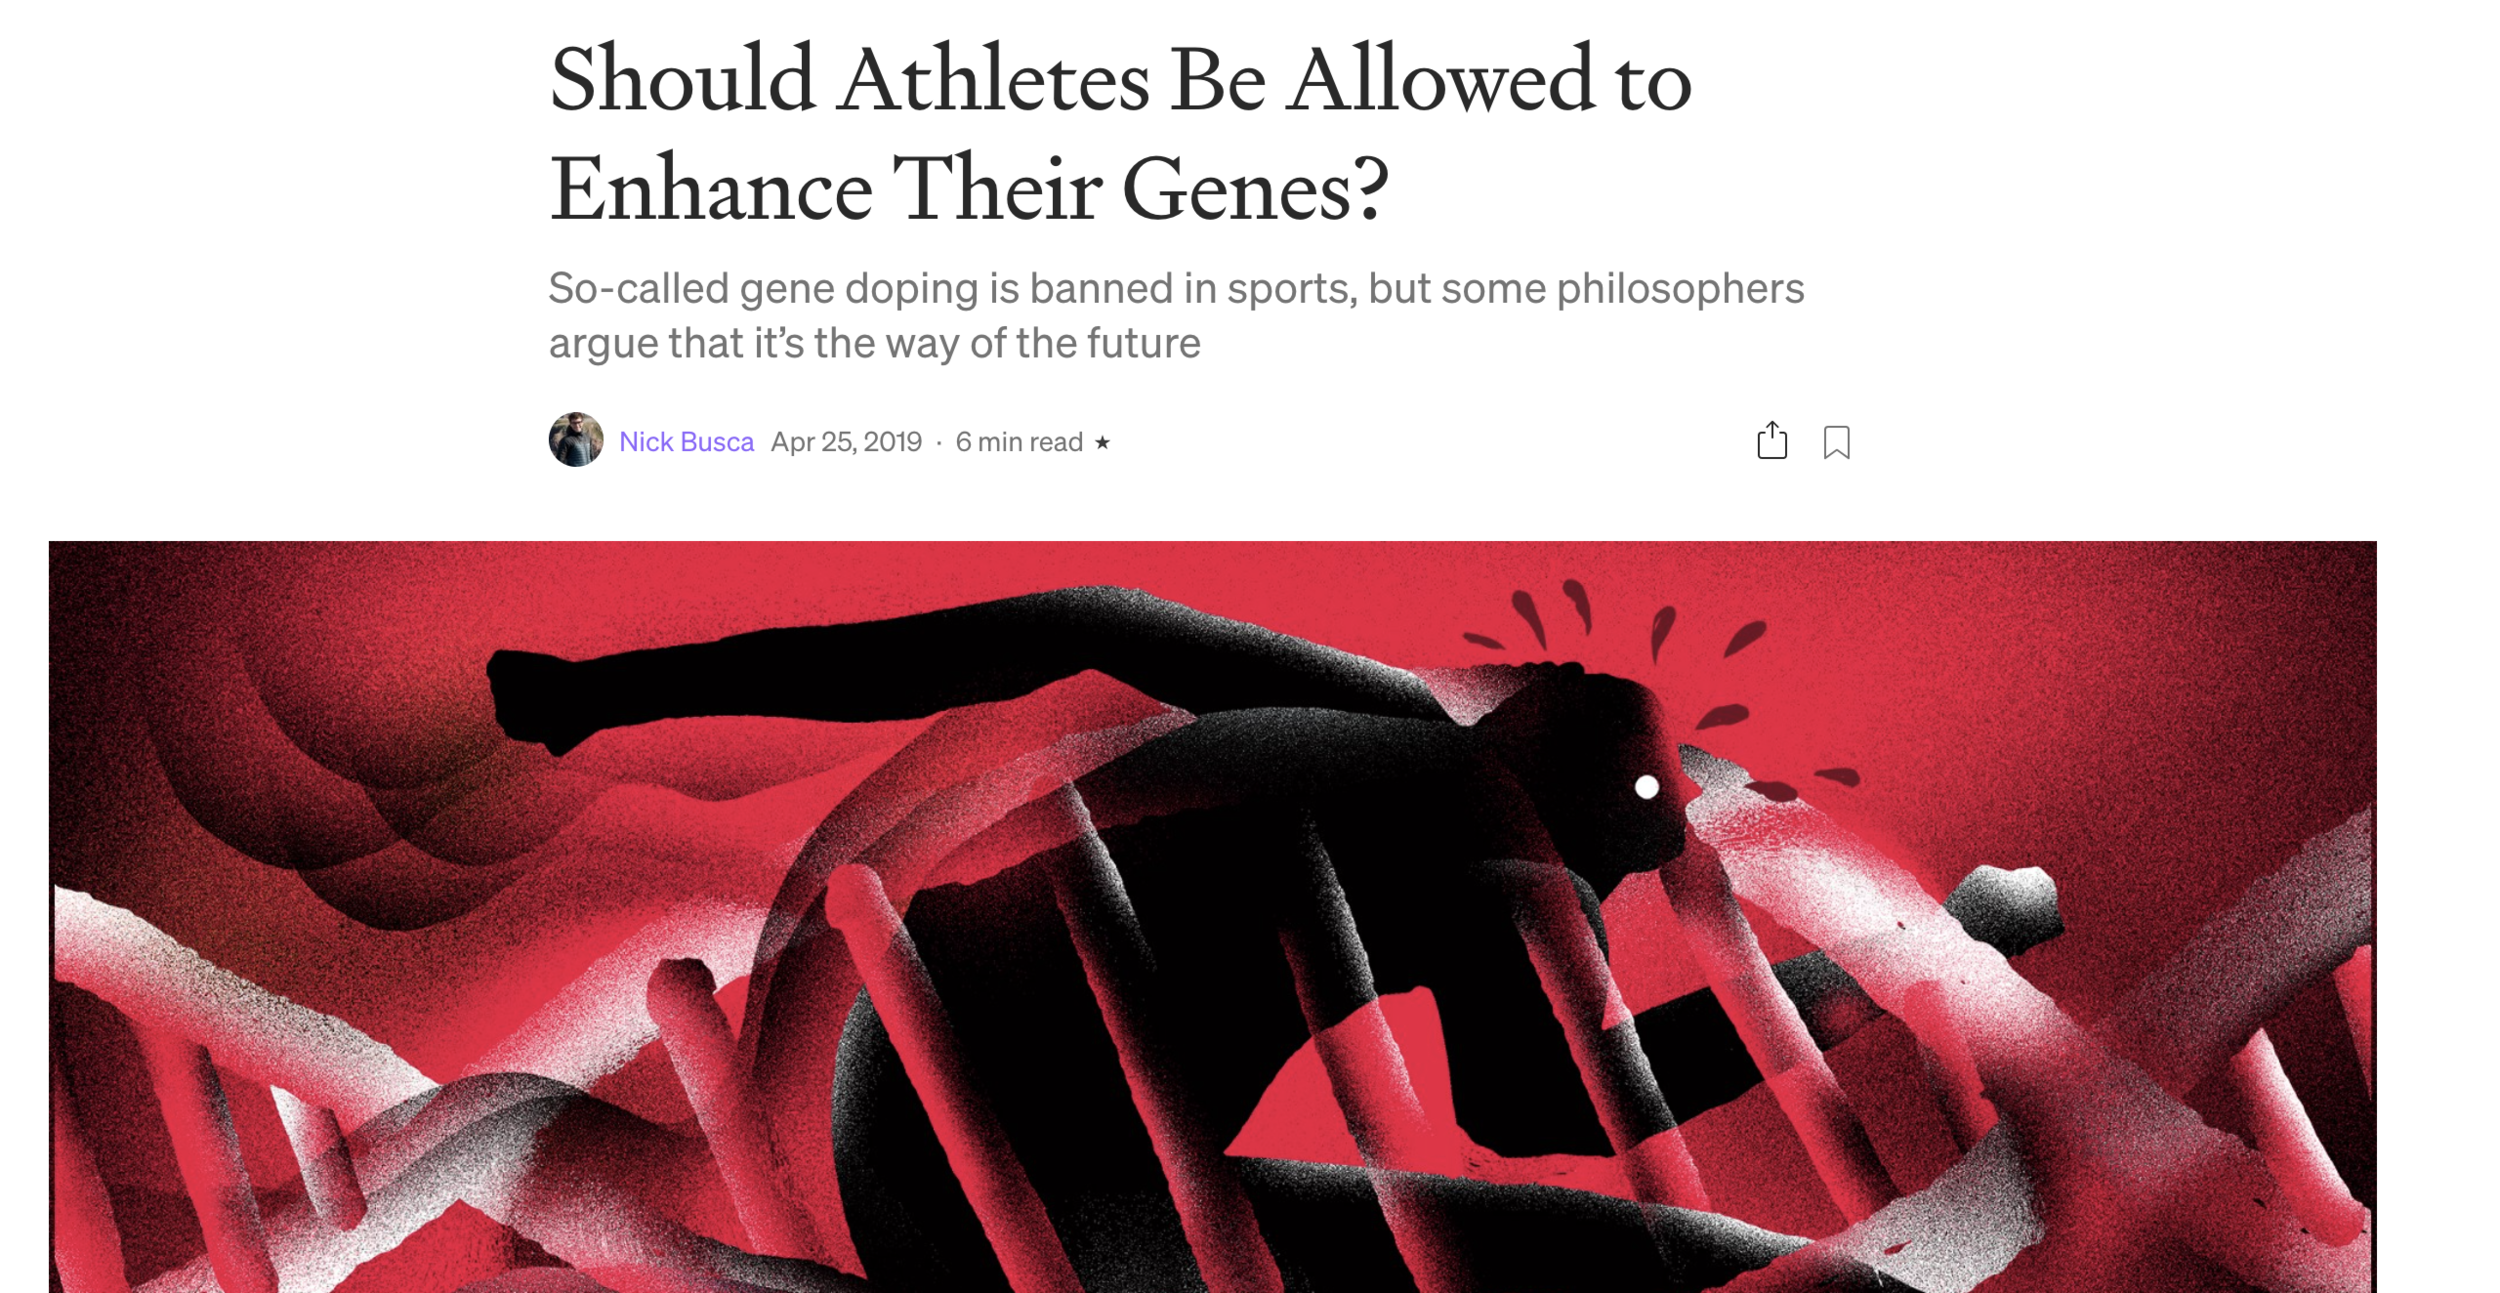 Should Athletes Be Allowed to Enhance Their Genes?